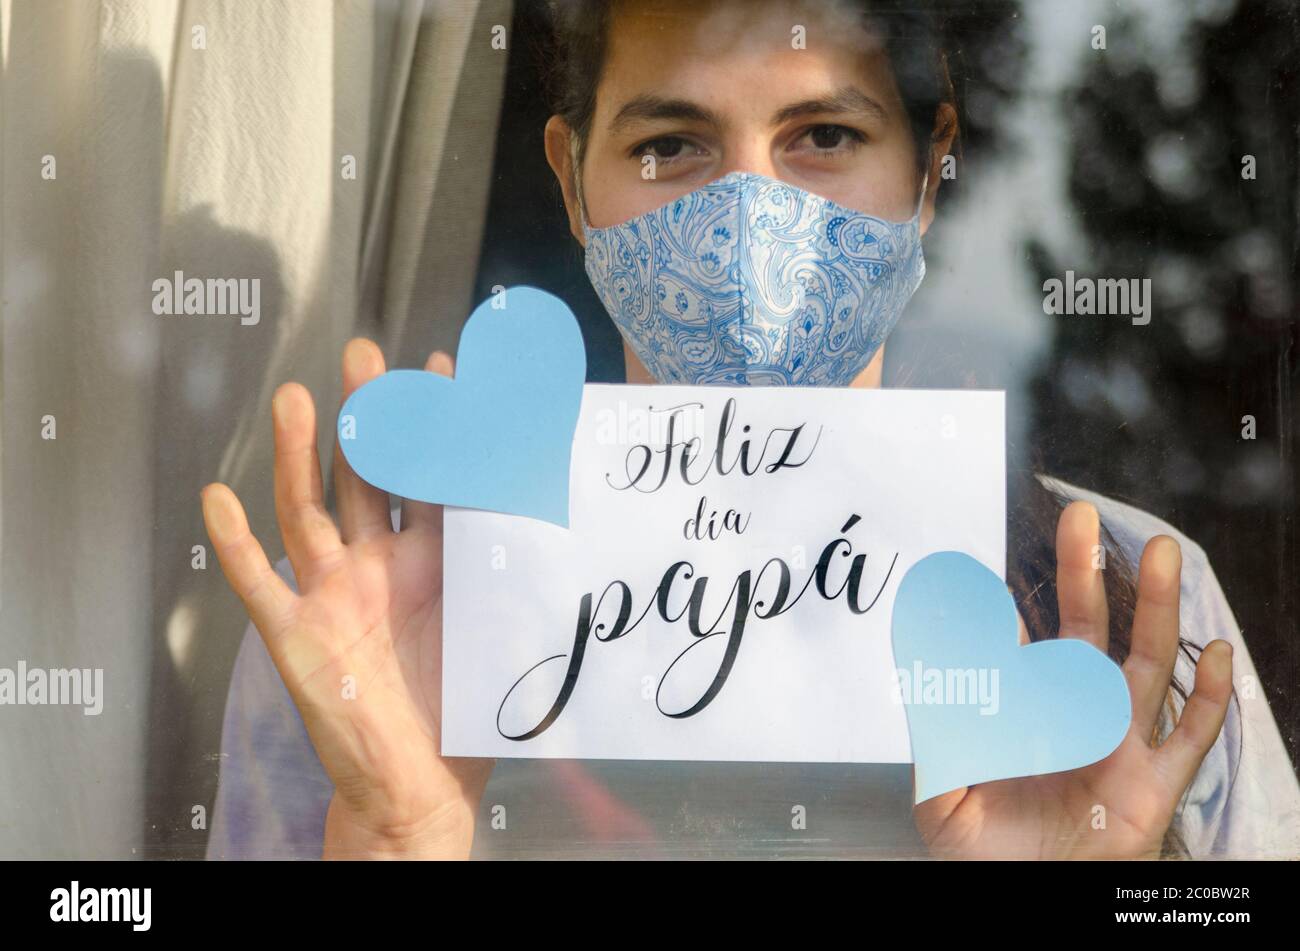 Young girl wearing a facemask at home holding a sheet of paper through the window that says in spanish: 'Happy day, dad!' Stock Photo